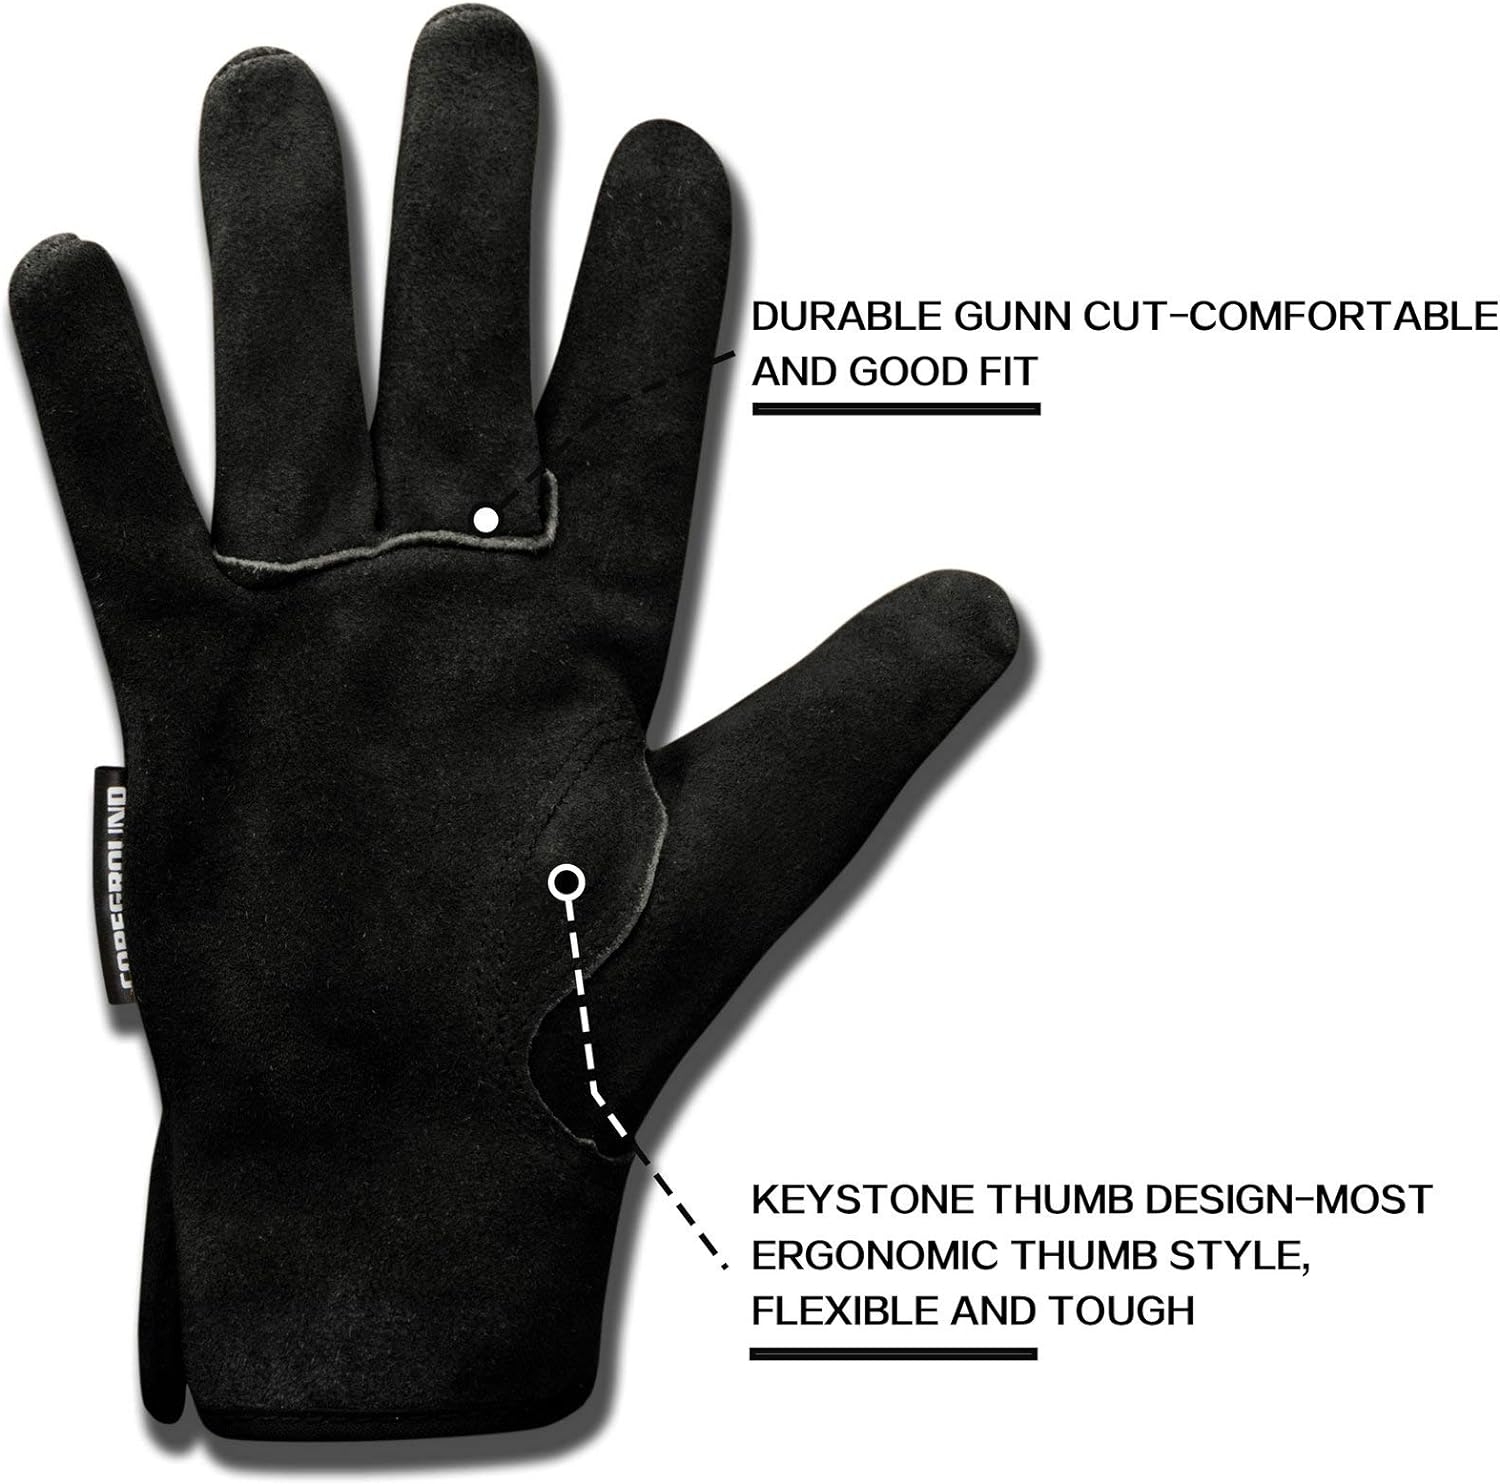 COREGROUND Leather Safety Work Gloves Gardening Carpenter Thorn Proof Truck Driving for Mens and Womens Waterproof heavy duty